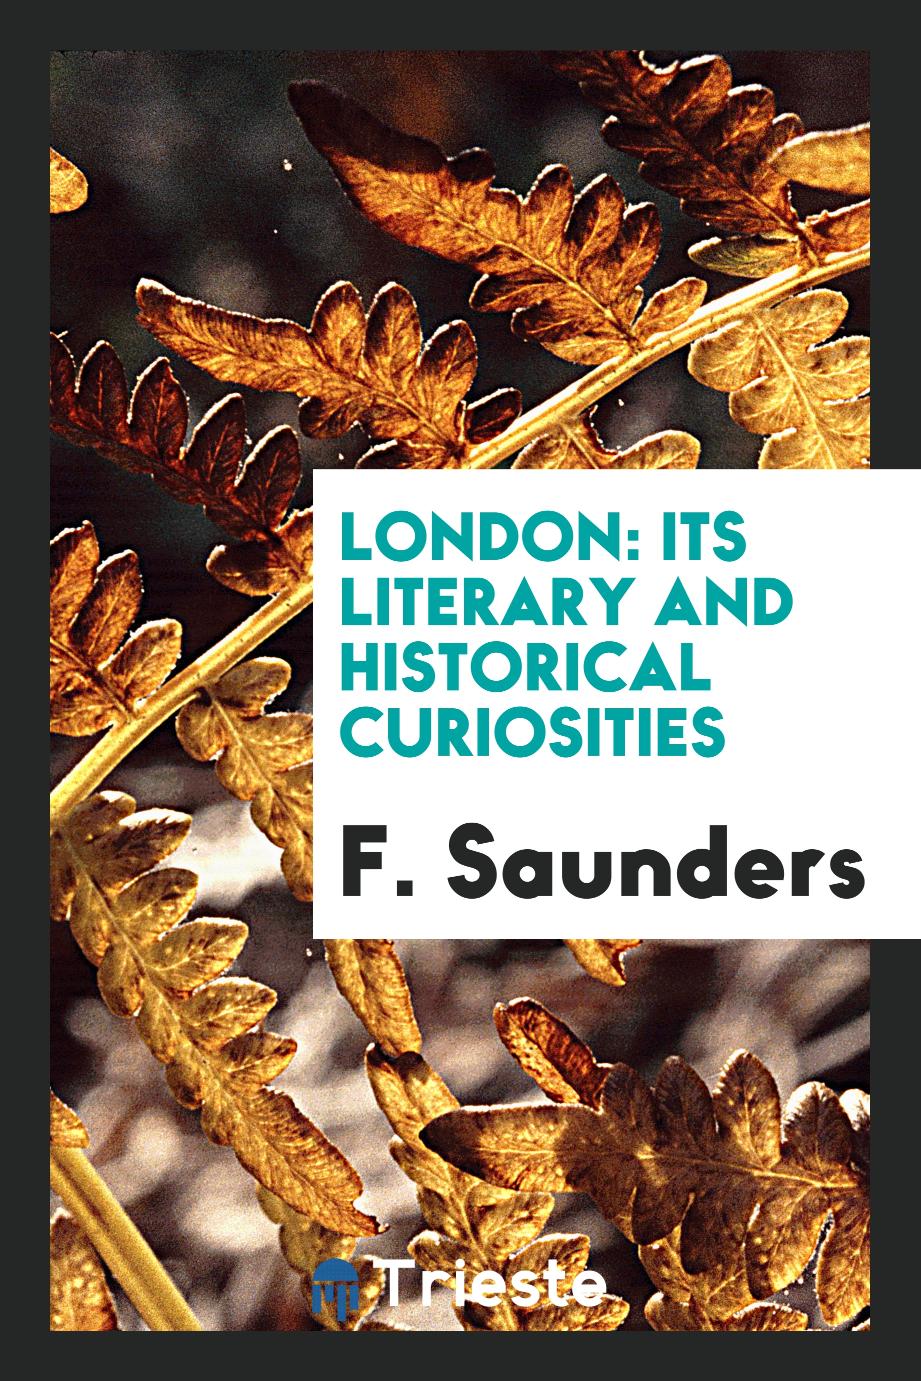 London: Its Literary and Historical Curiosities